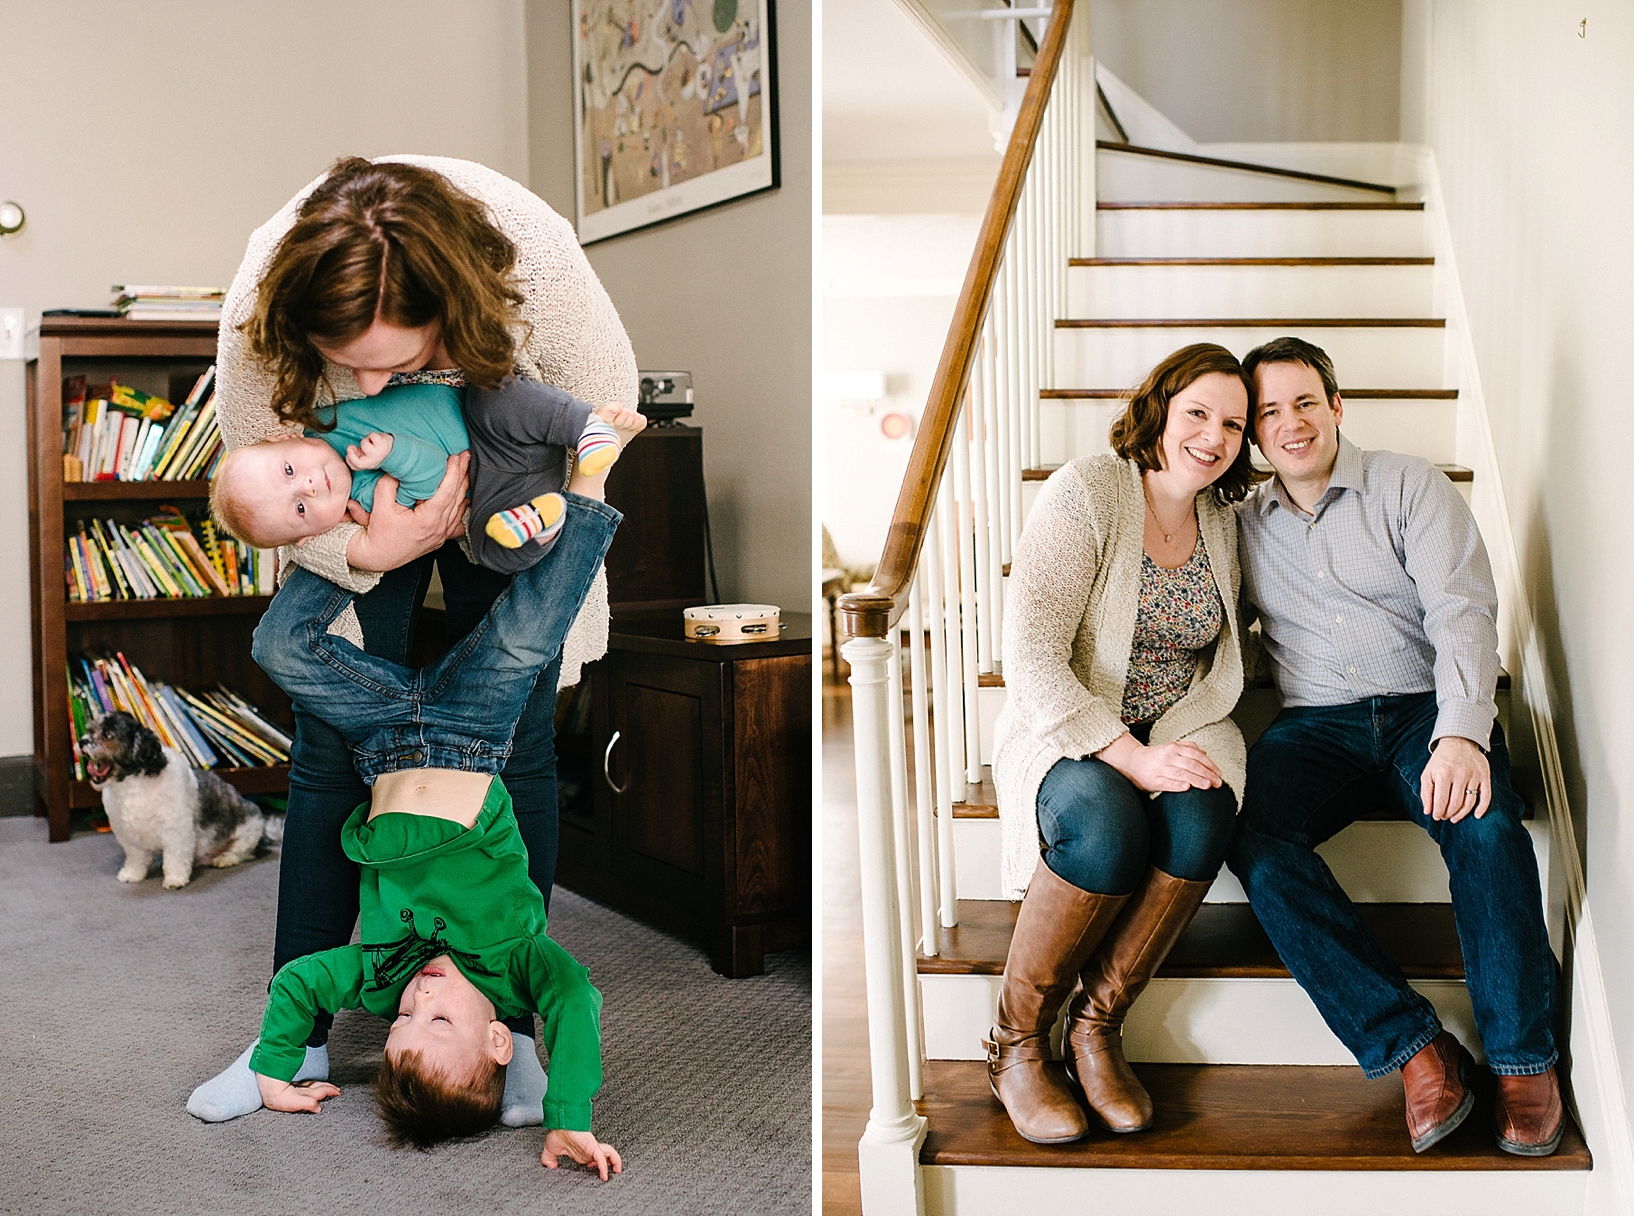 mom holding infant in her arms while other son does handstand at her feet